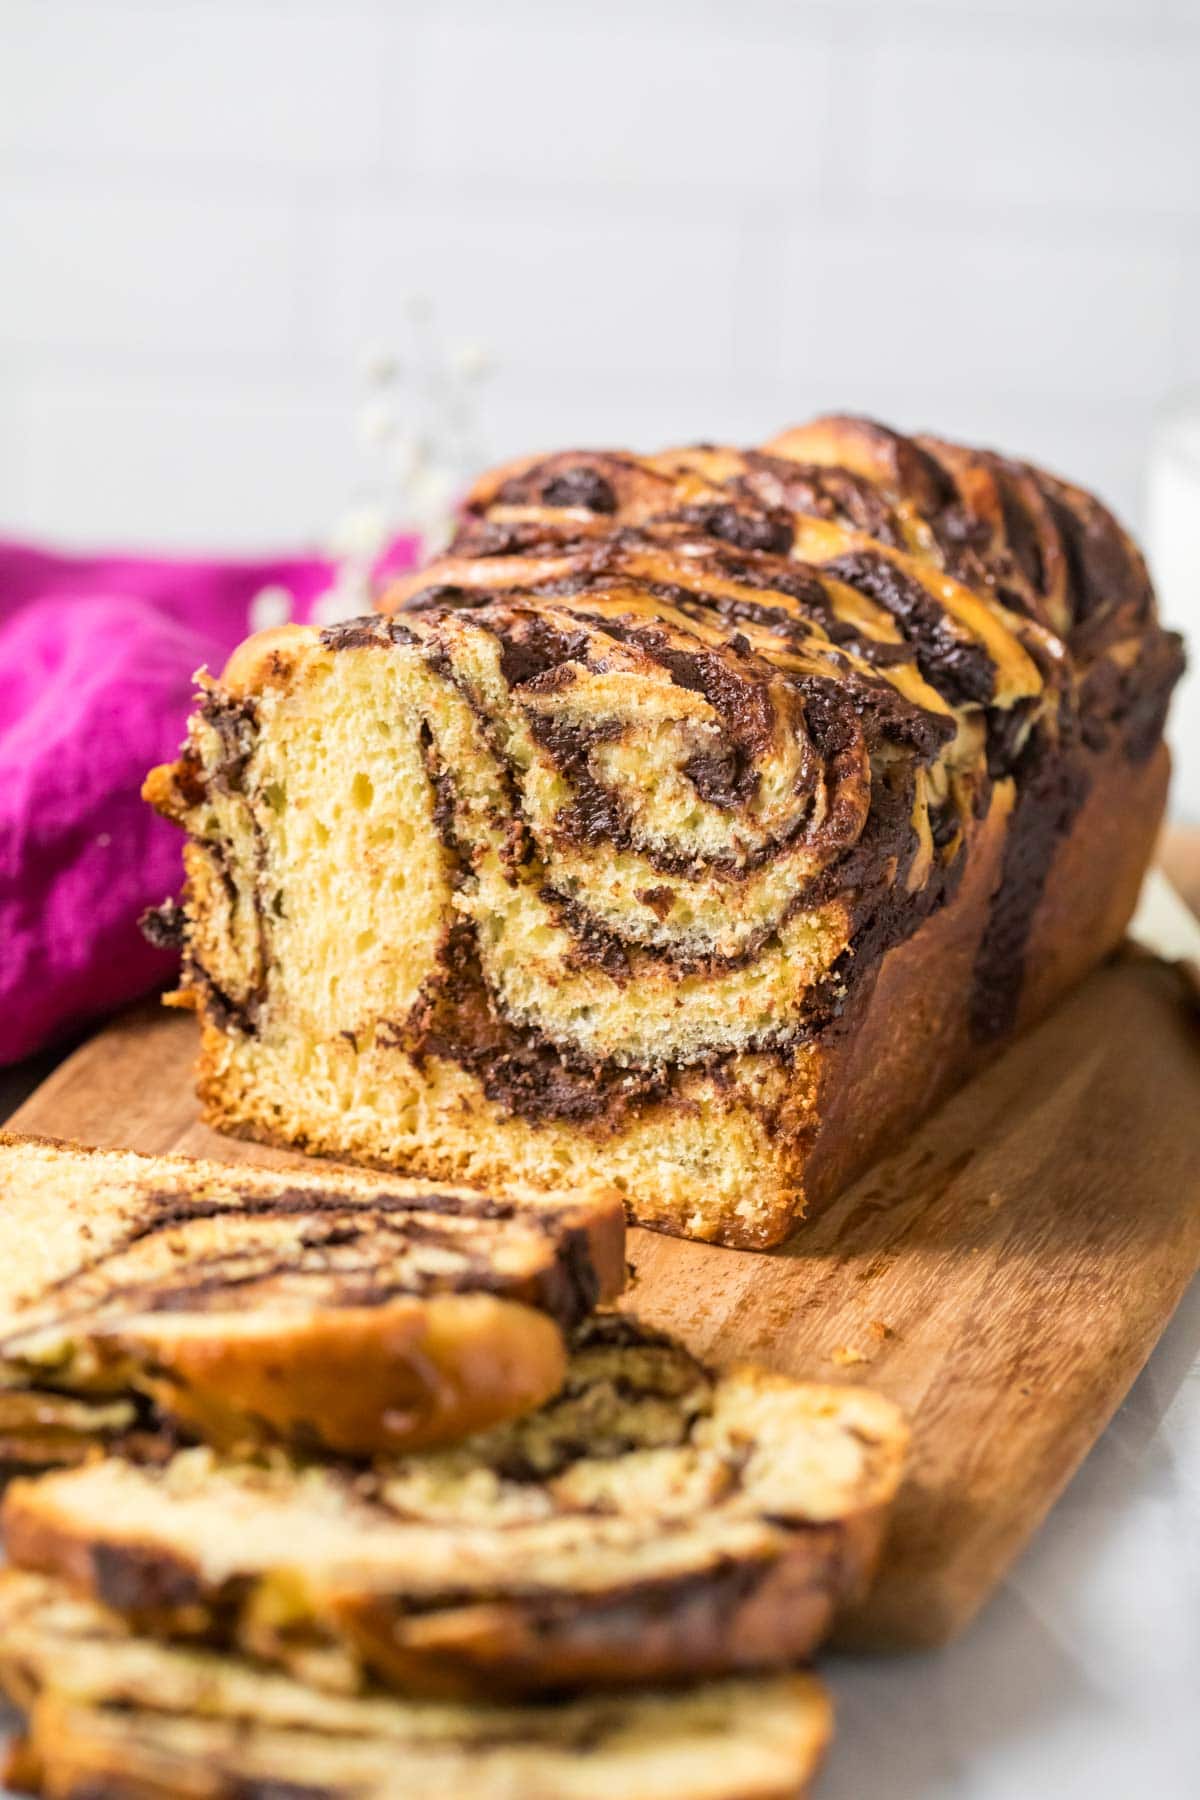 Loaf of chocolate babka that's been sliced to show the chocolate swirls.